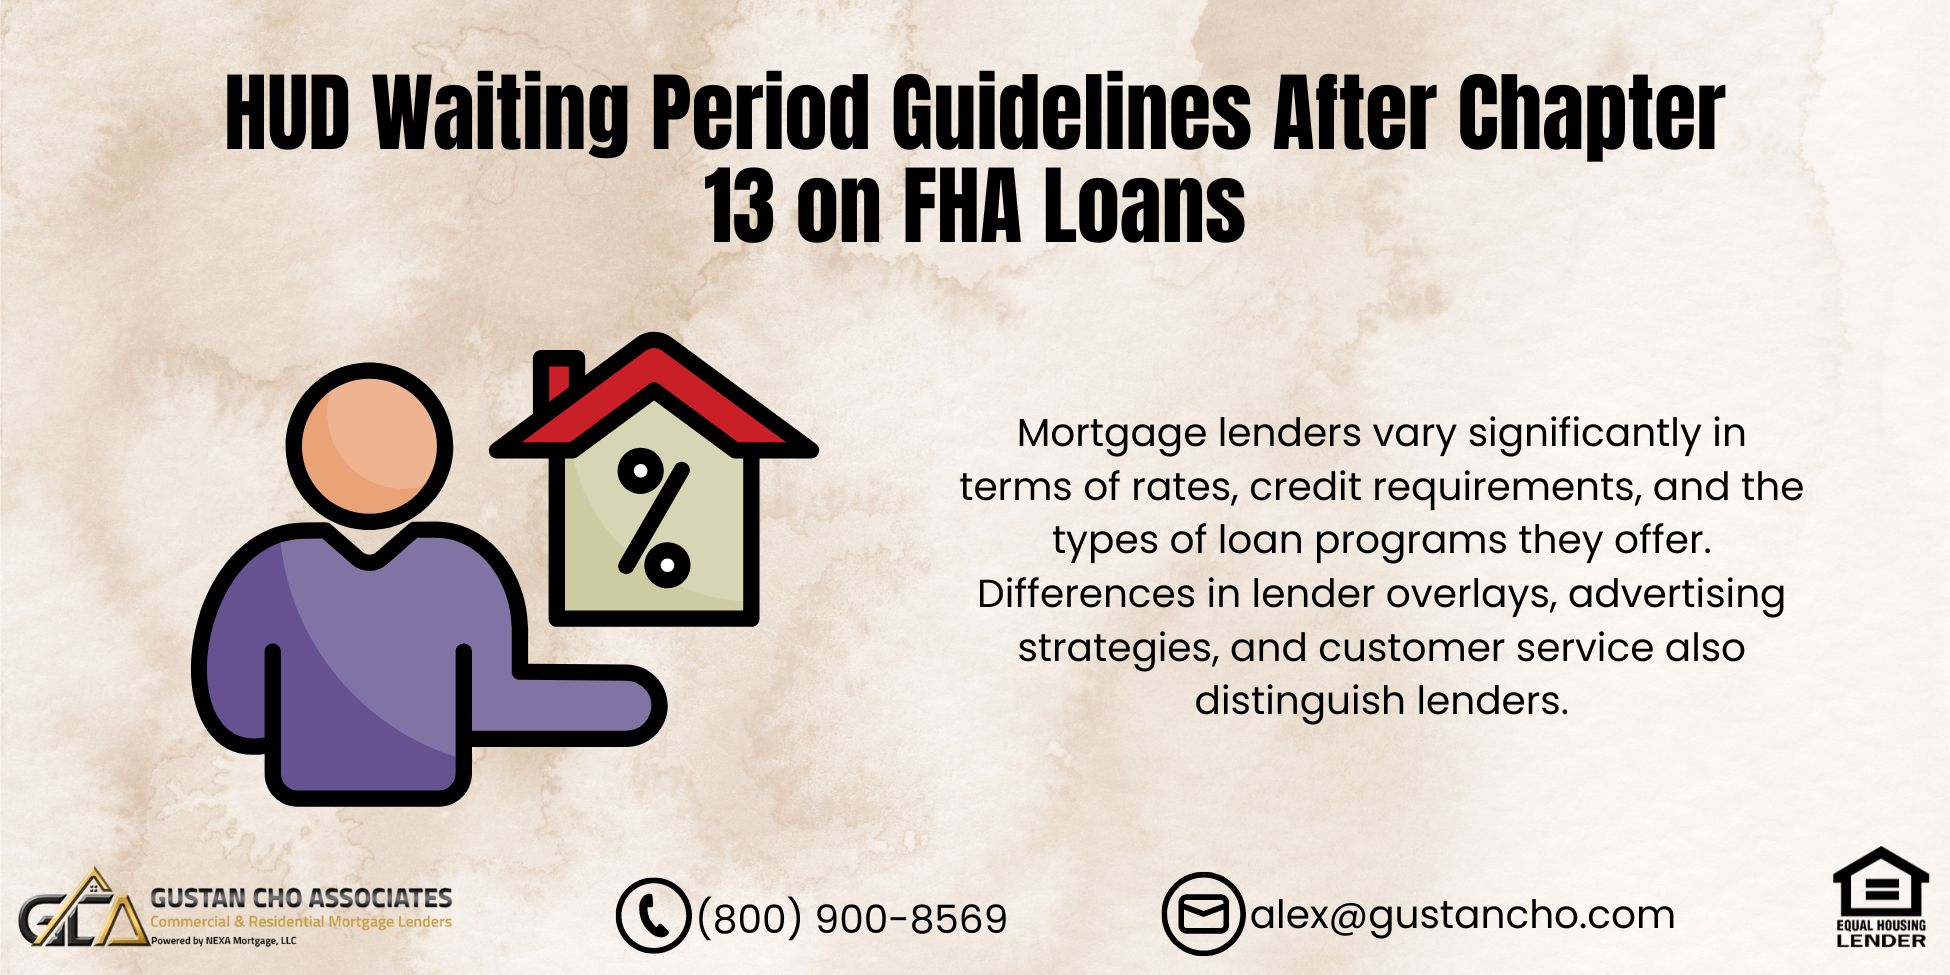 Do All Lenders Have The Same Guidelines